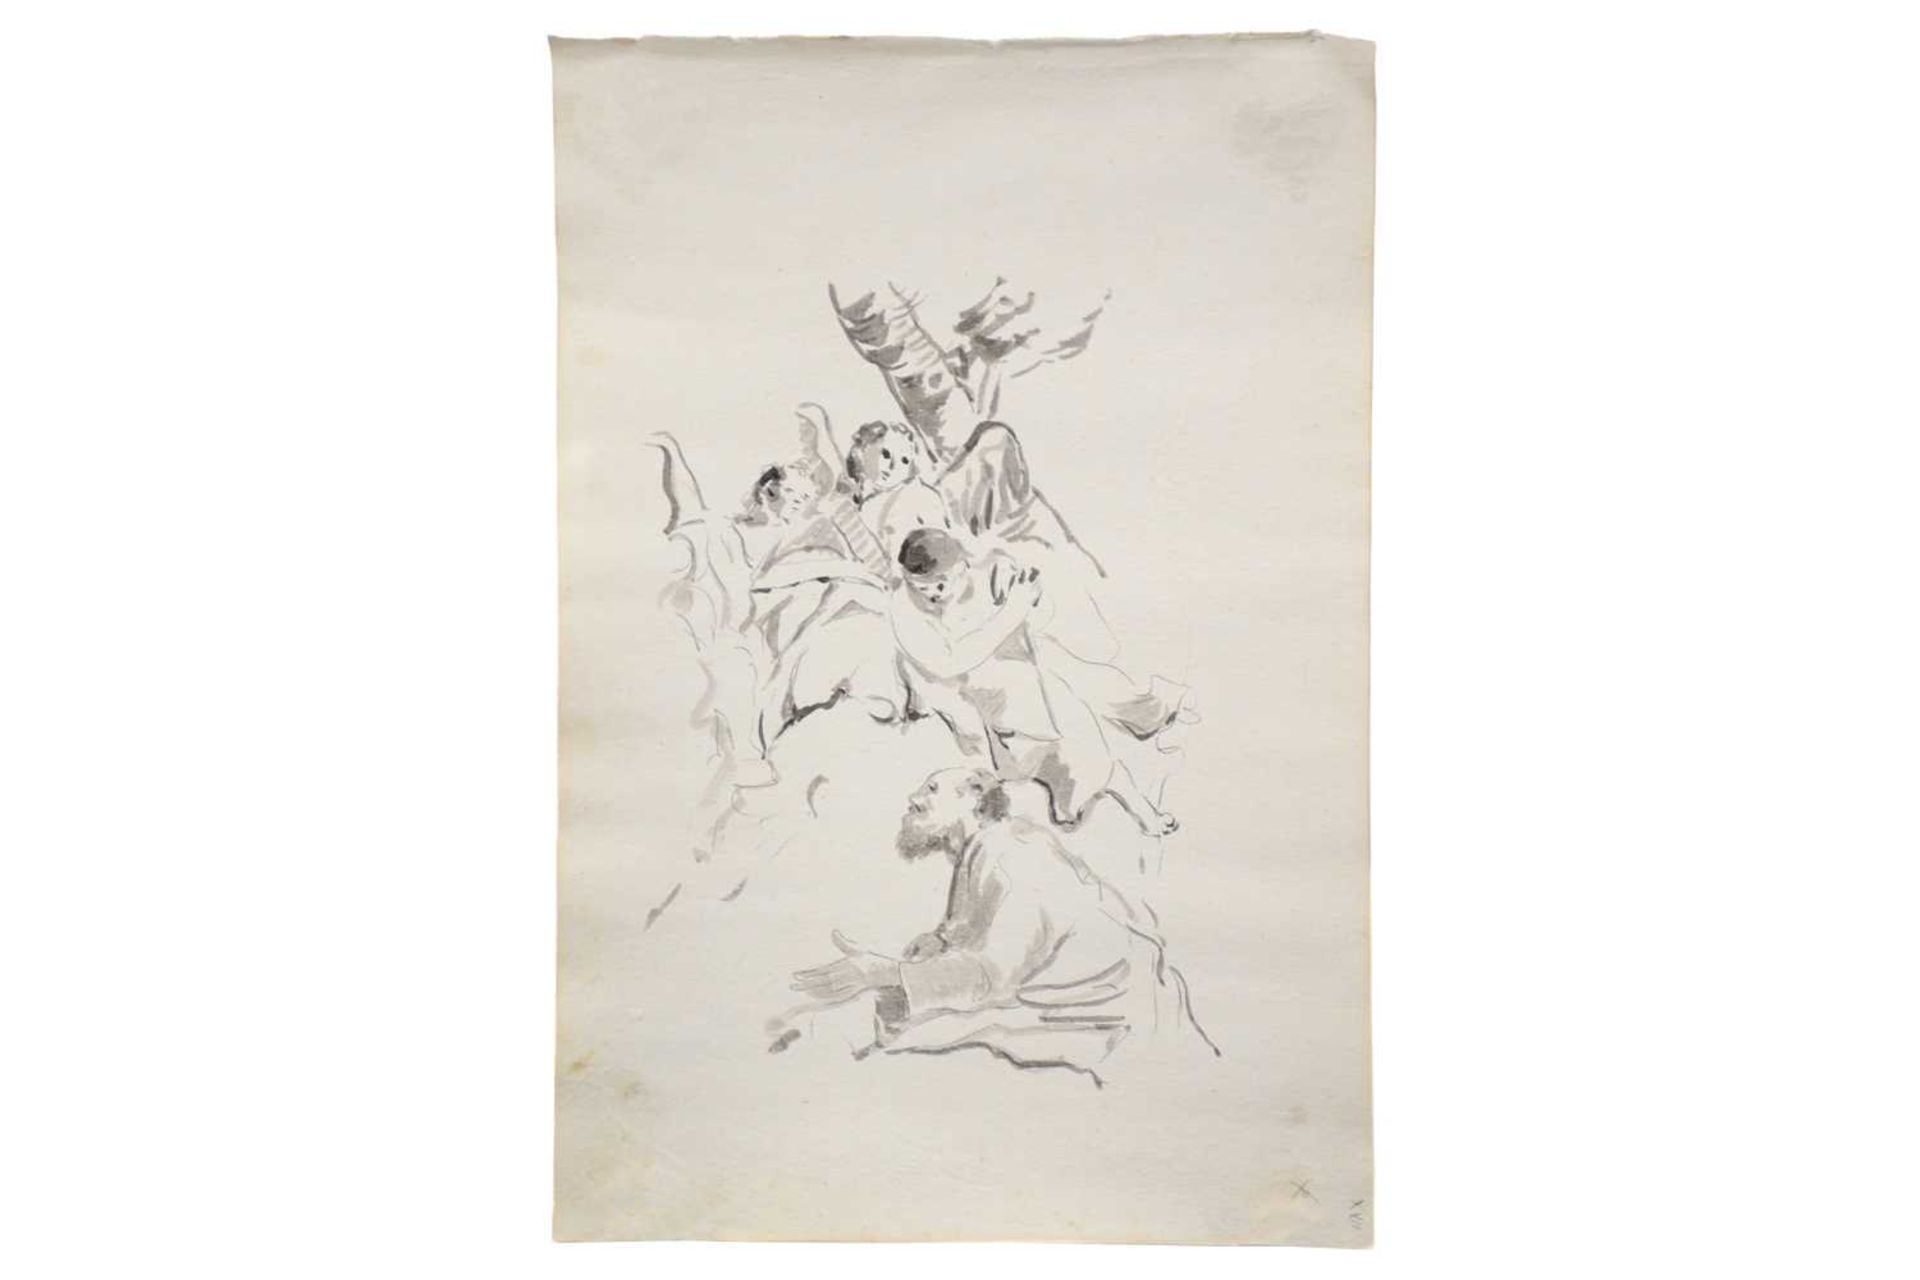 Attributed to Giambattista Tiepolo (1696-1770), Study of Angels and Elders for a ceiling fresco, pen